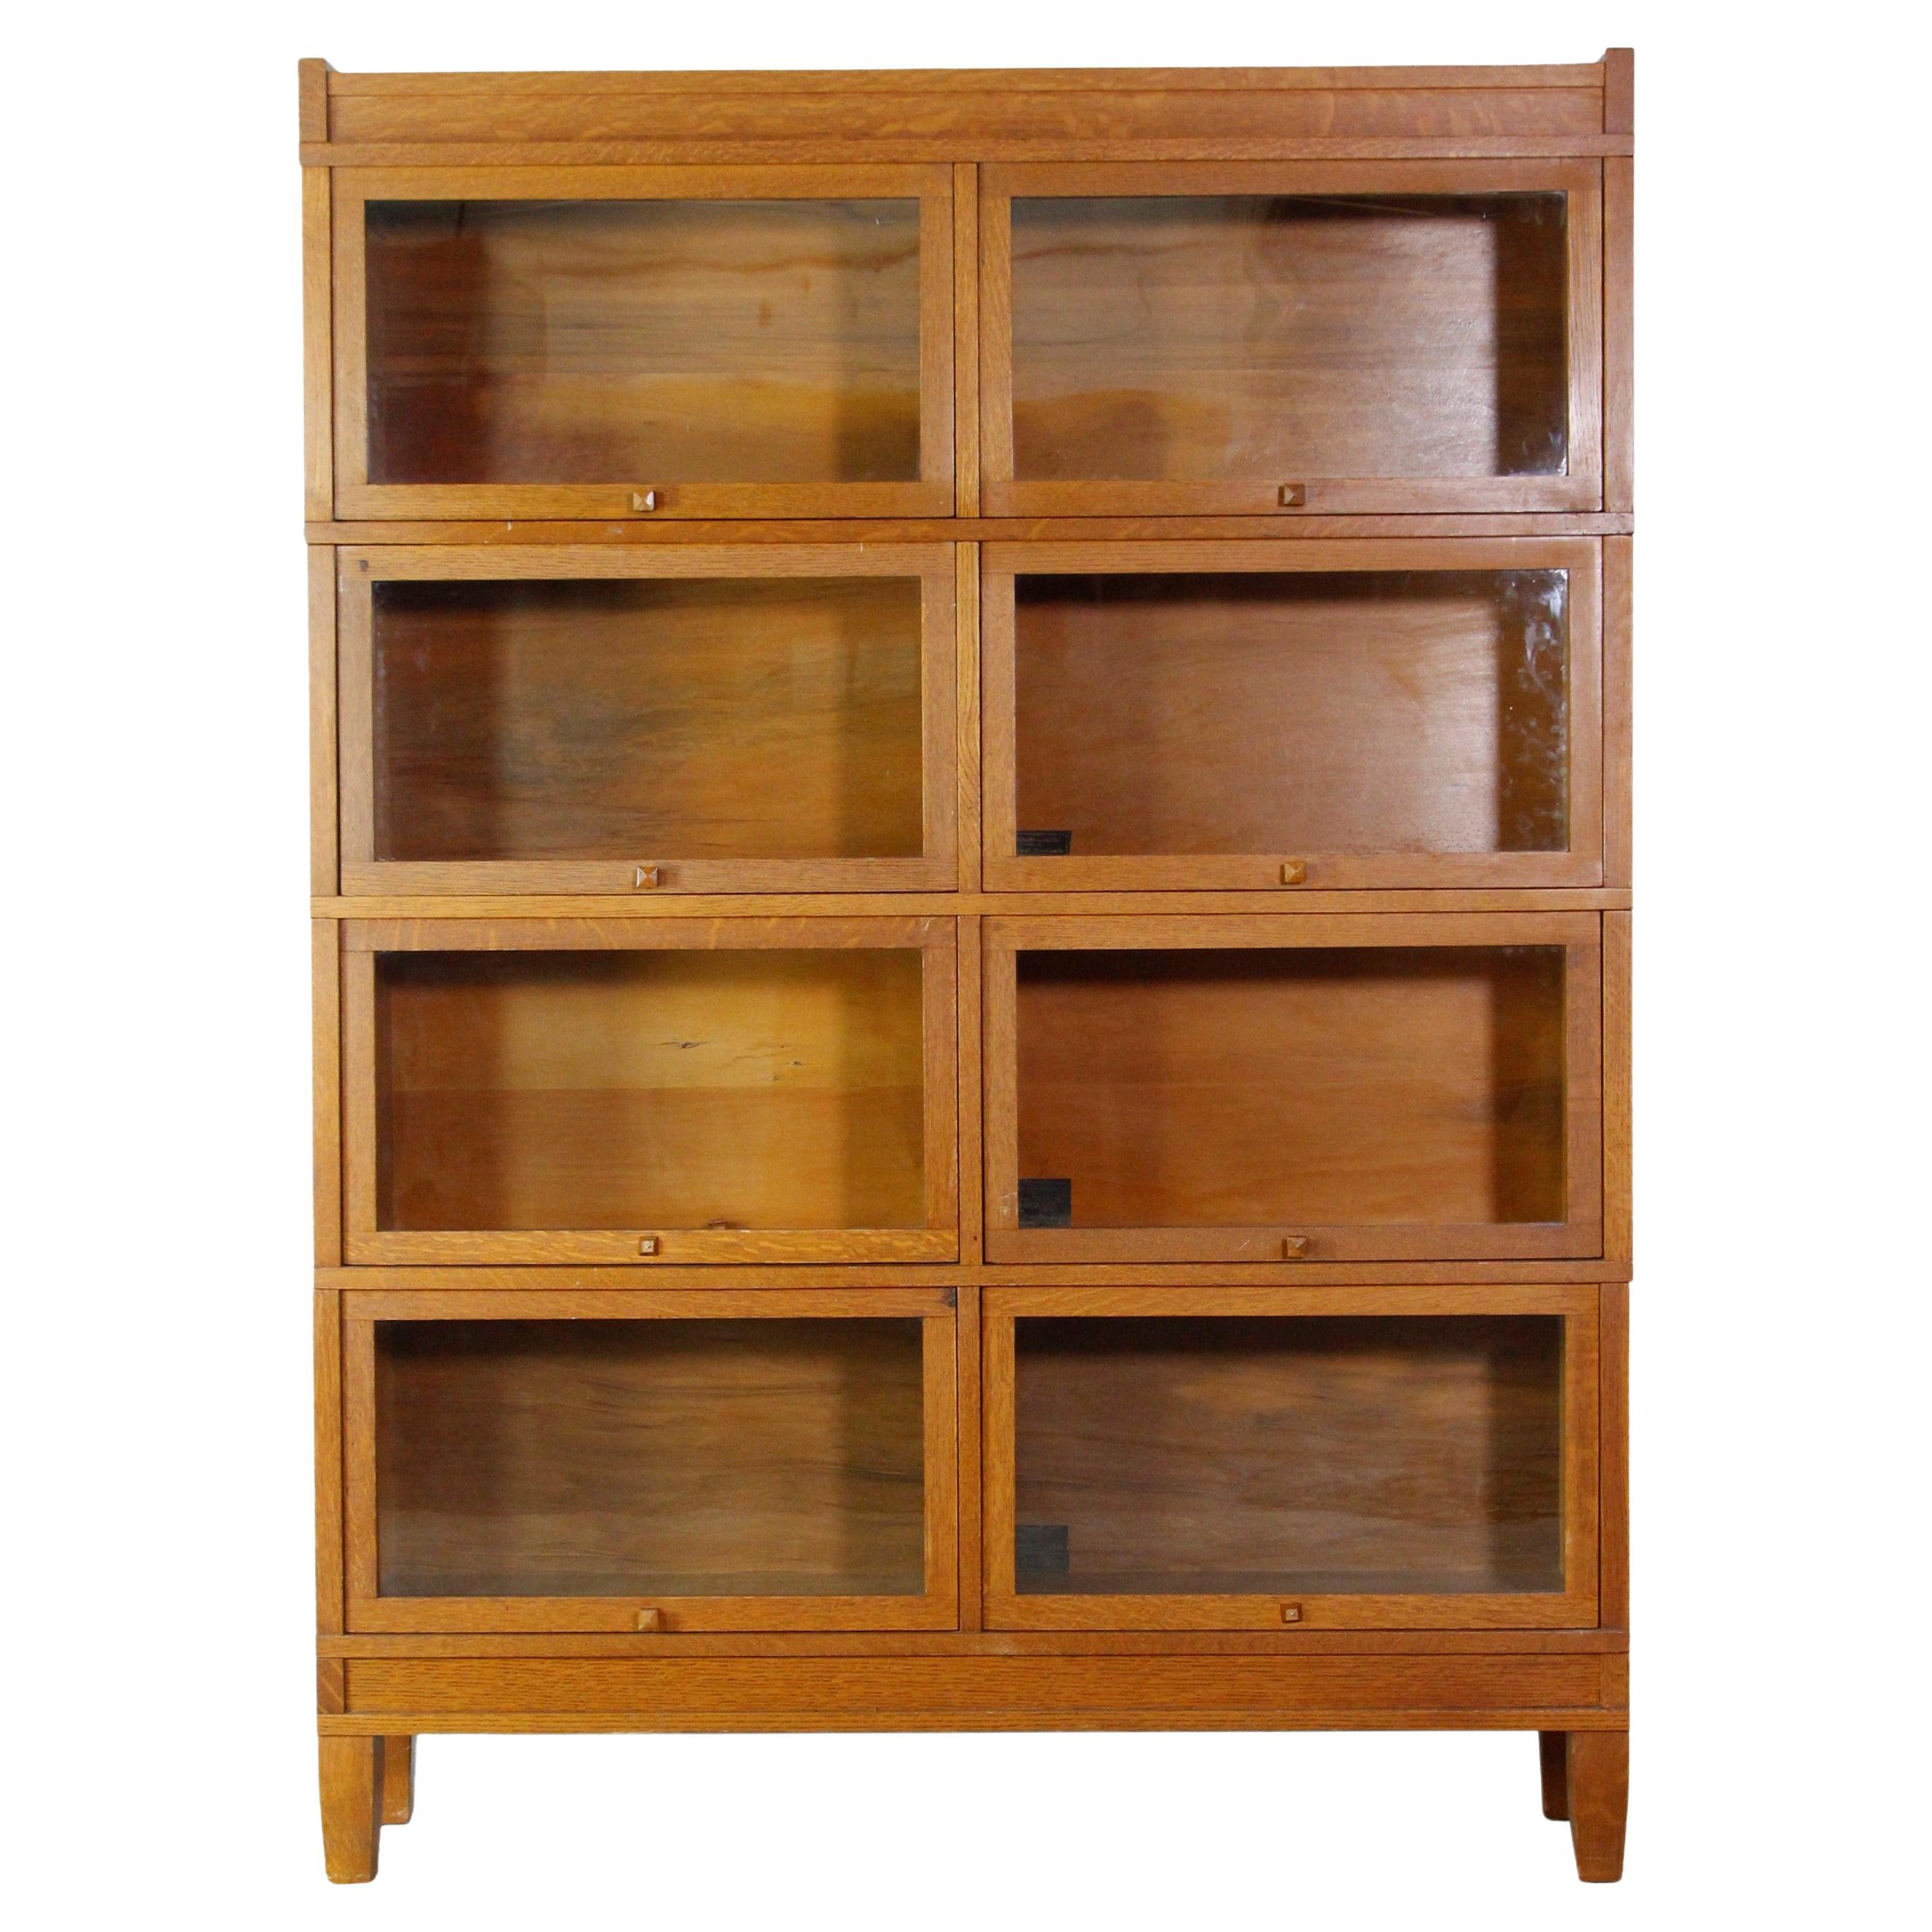 1940s Quarter Sawn Oak Barrister Bookcase w/ 8 Sections by Wernicke